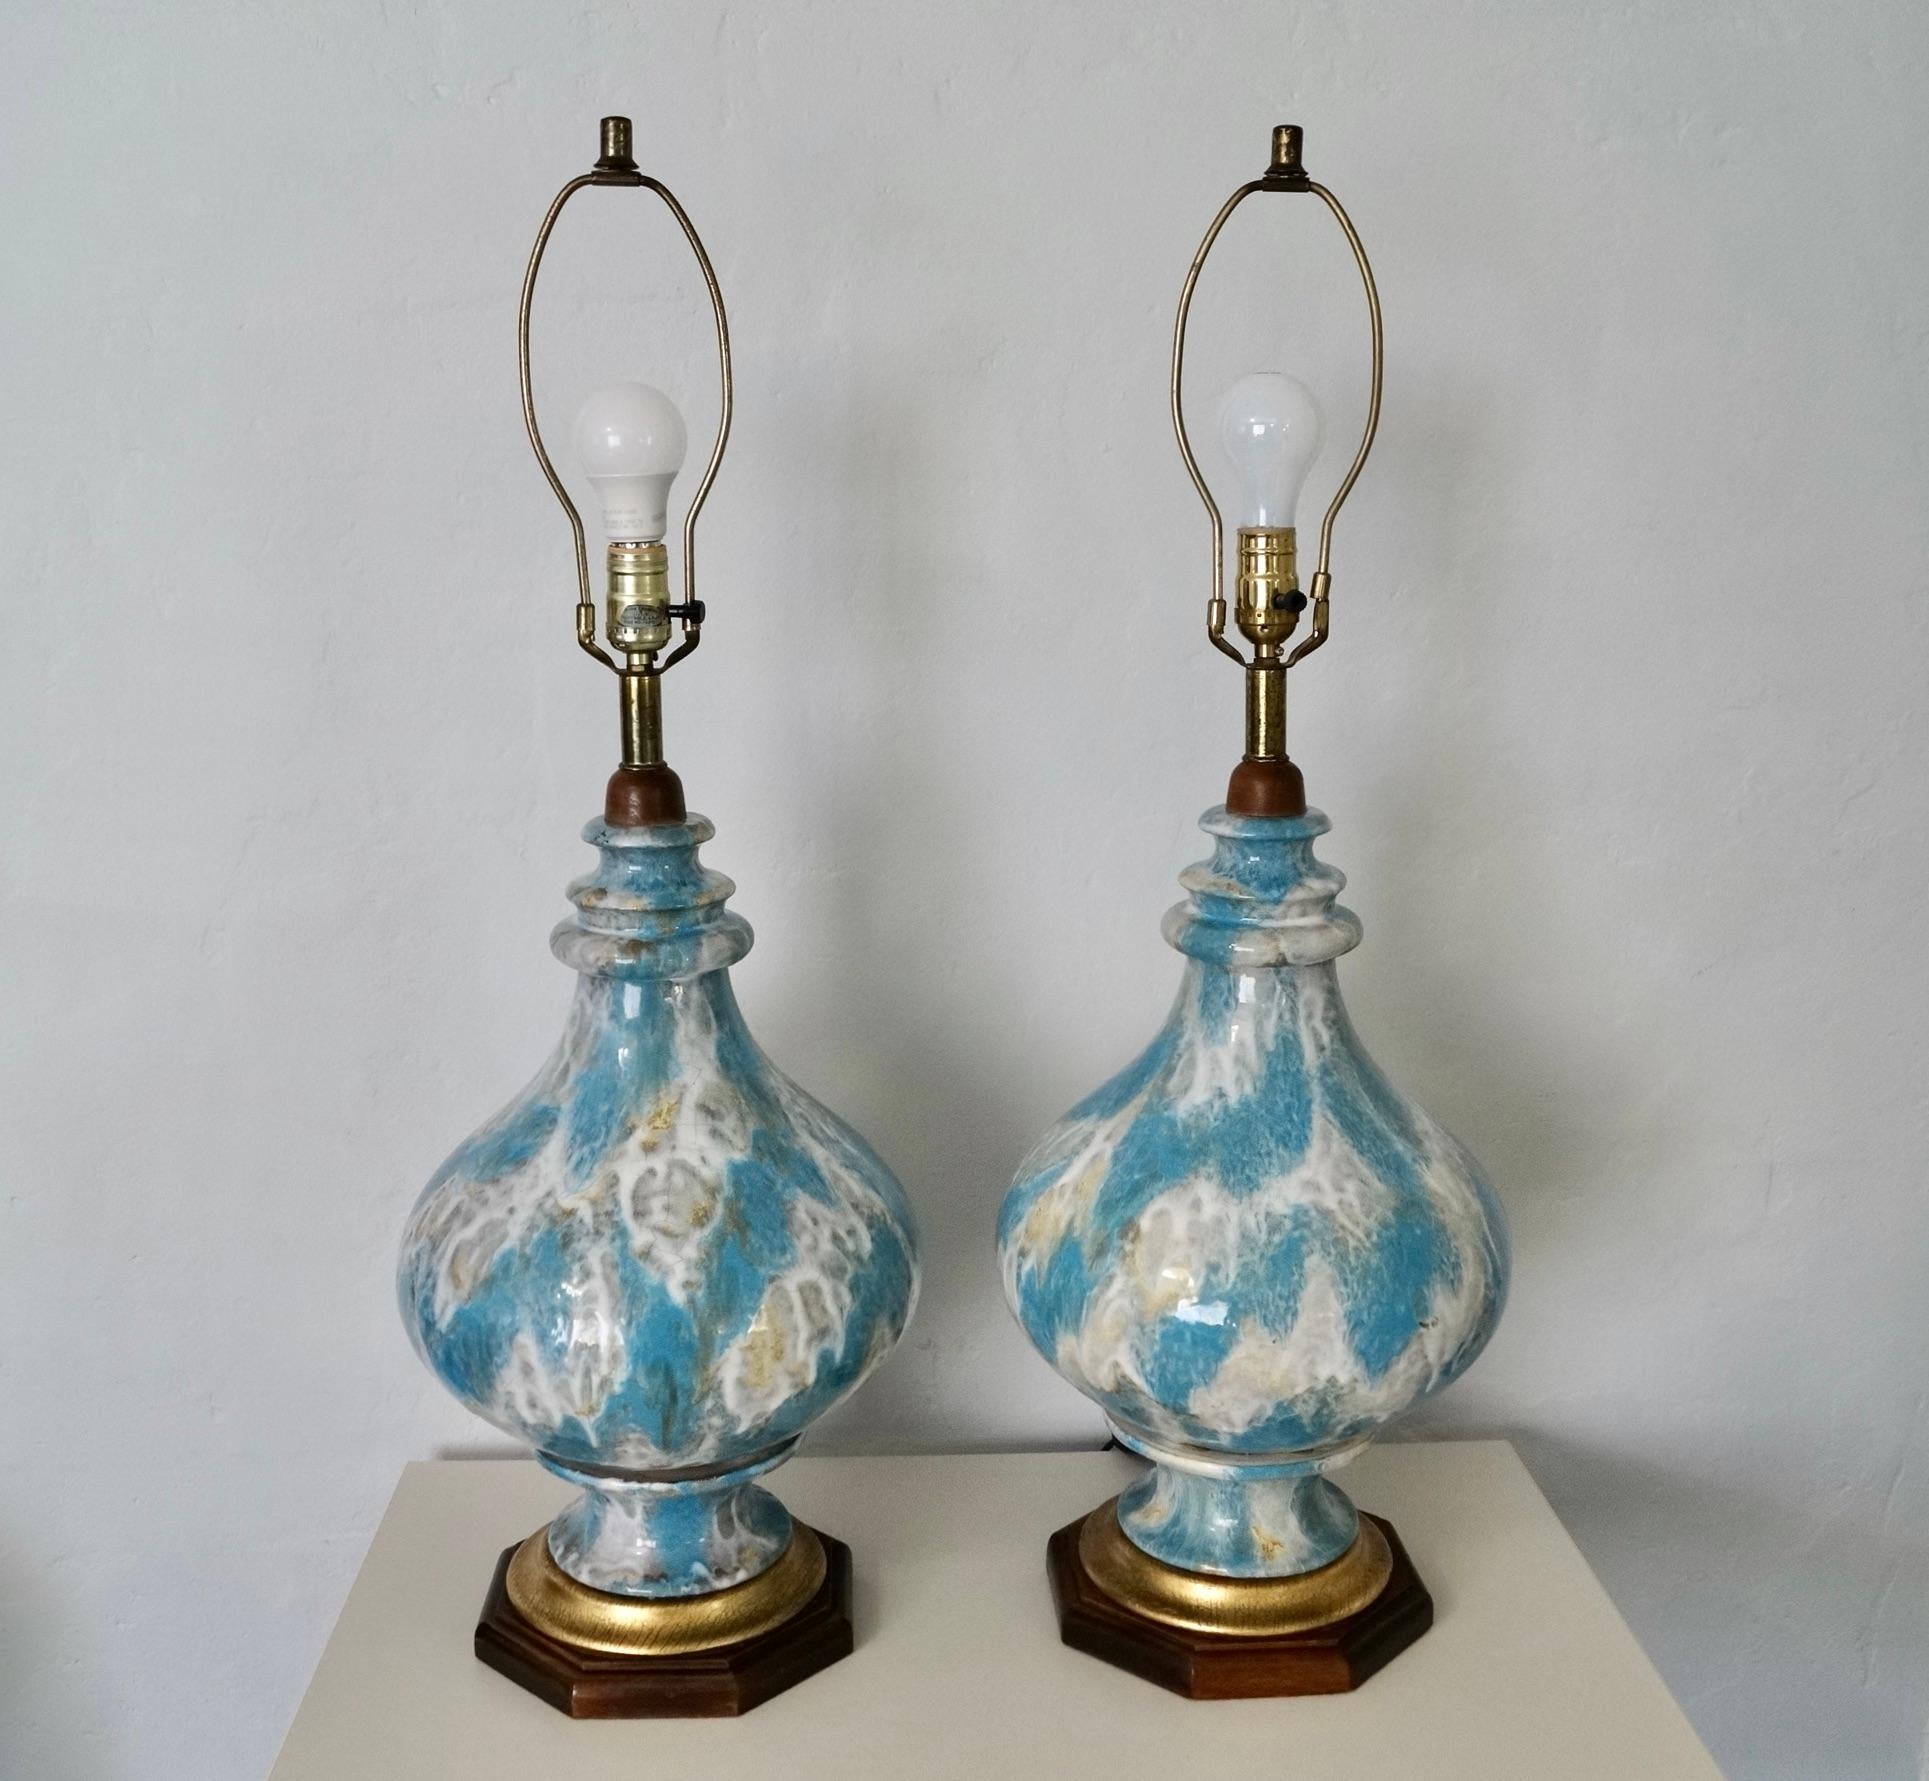 Vintage pair of Mid century Modern table lamps for sale. They are both in good condition, and rare. They have a solid wood base in a walnut finish, and a gold leaf wood layered on top of the base. They are made of ceramic with a great crackle drip